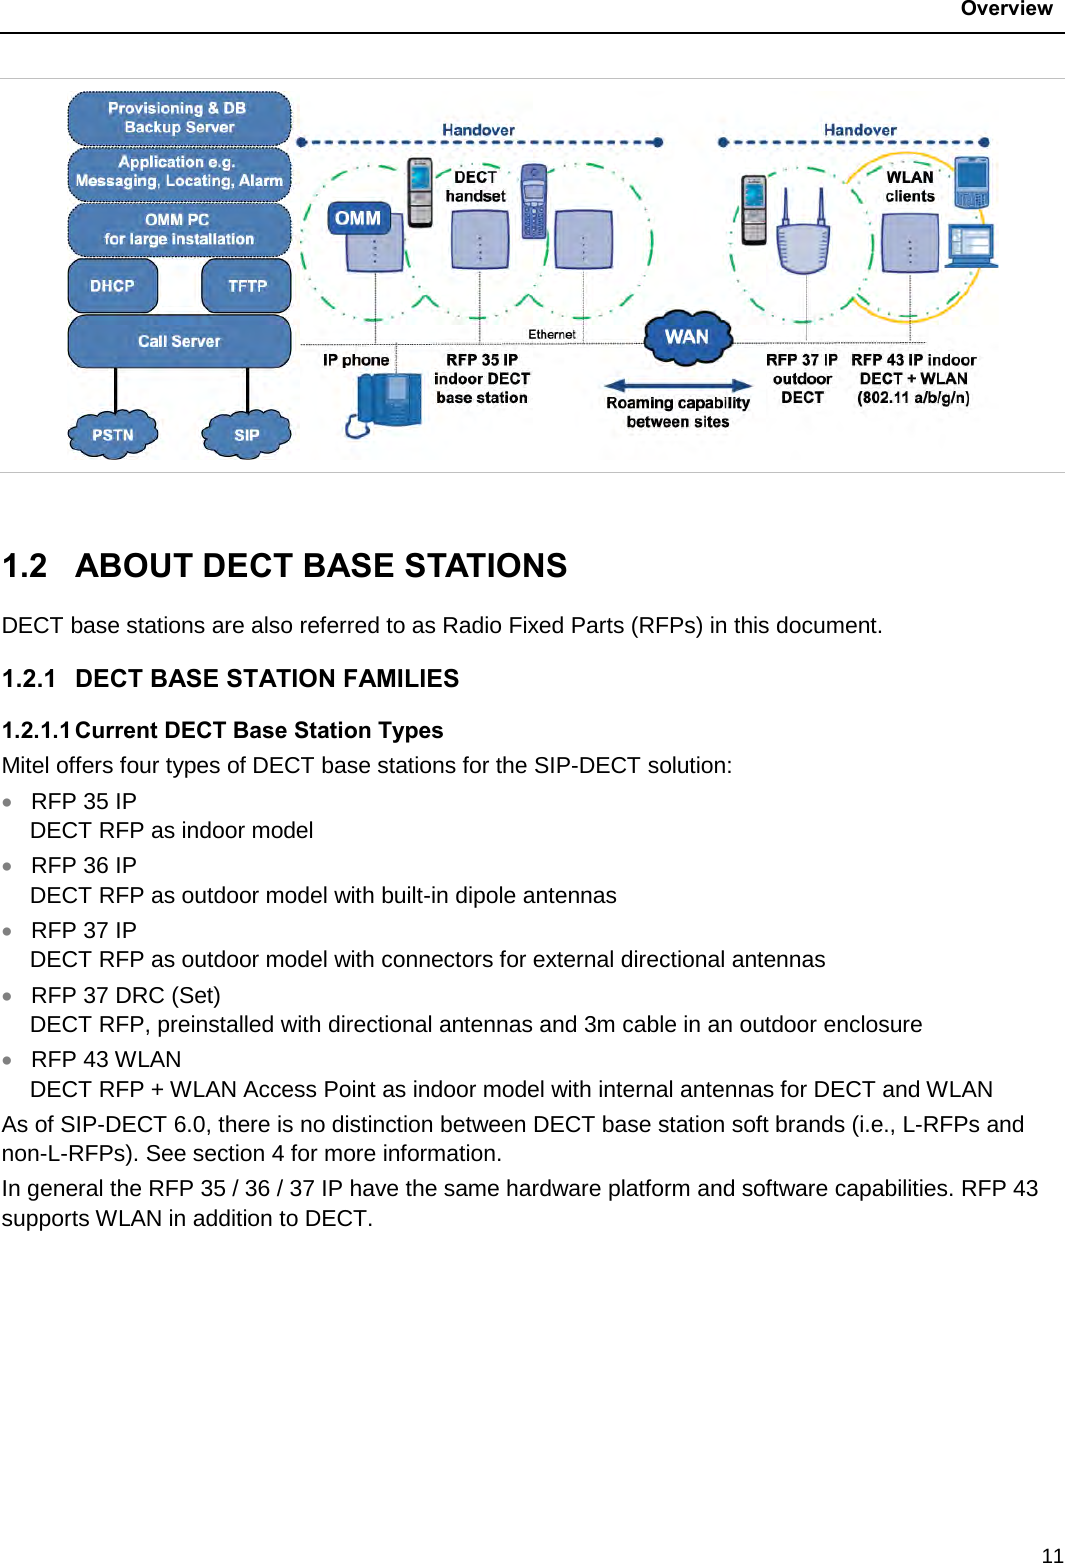  Overview  11   1.2  ABOUT DECT BASE STATIONS DECT base stations are also referred to as Radio Fixed Parts (RFPs) in this document. 1.2.1 DECT BASE STATION FAMILIES 1.2.1.1 Current DECT Base Station Types Mitel offers four types of DECT base stations for the SIP-DECT solution: • RFP 35 IP   DECT RFP as indoor model • RFP 36 IP   DECT RFP as outdoor model with built-in dipole antennas • RFP 37 IP   DECT RFP as outdoor model with connectors for external directional antennas • RFP 37 DRC (Set) DECT RFP, preinstalled with directional antennas and 3m cable in an outdoor enclosure • RFP 43 WLAN  DECT RFP + WLAN Access Point as indoor model with internal antennas for DECT and WLAN As of SIP-DECT 6.0, there is no distinction between DECT base station soft brands (i.e., L-RFPs and non-L-RFPs). See section 4 for more information.  In general the RFP 35 / 36 / 37 IP have the same hardware platform and software capabilities. RFP 43 supports WLAN in addition to DECT. 